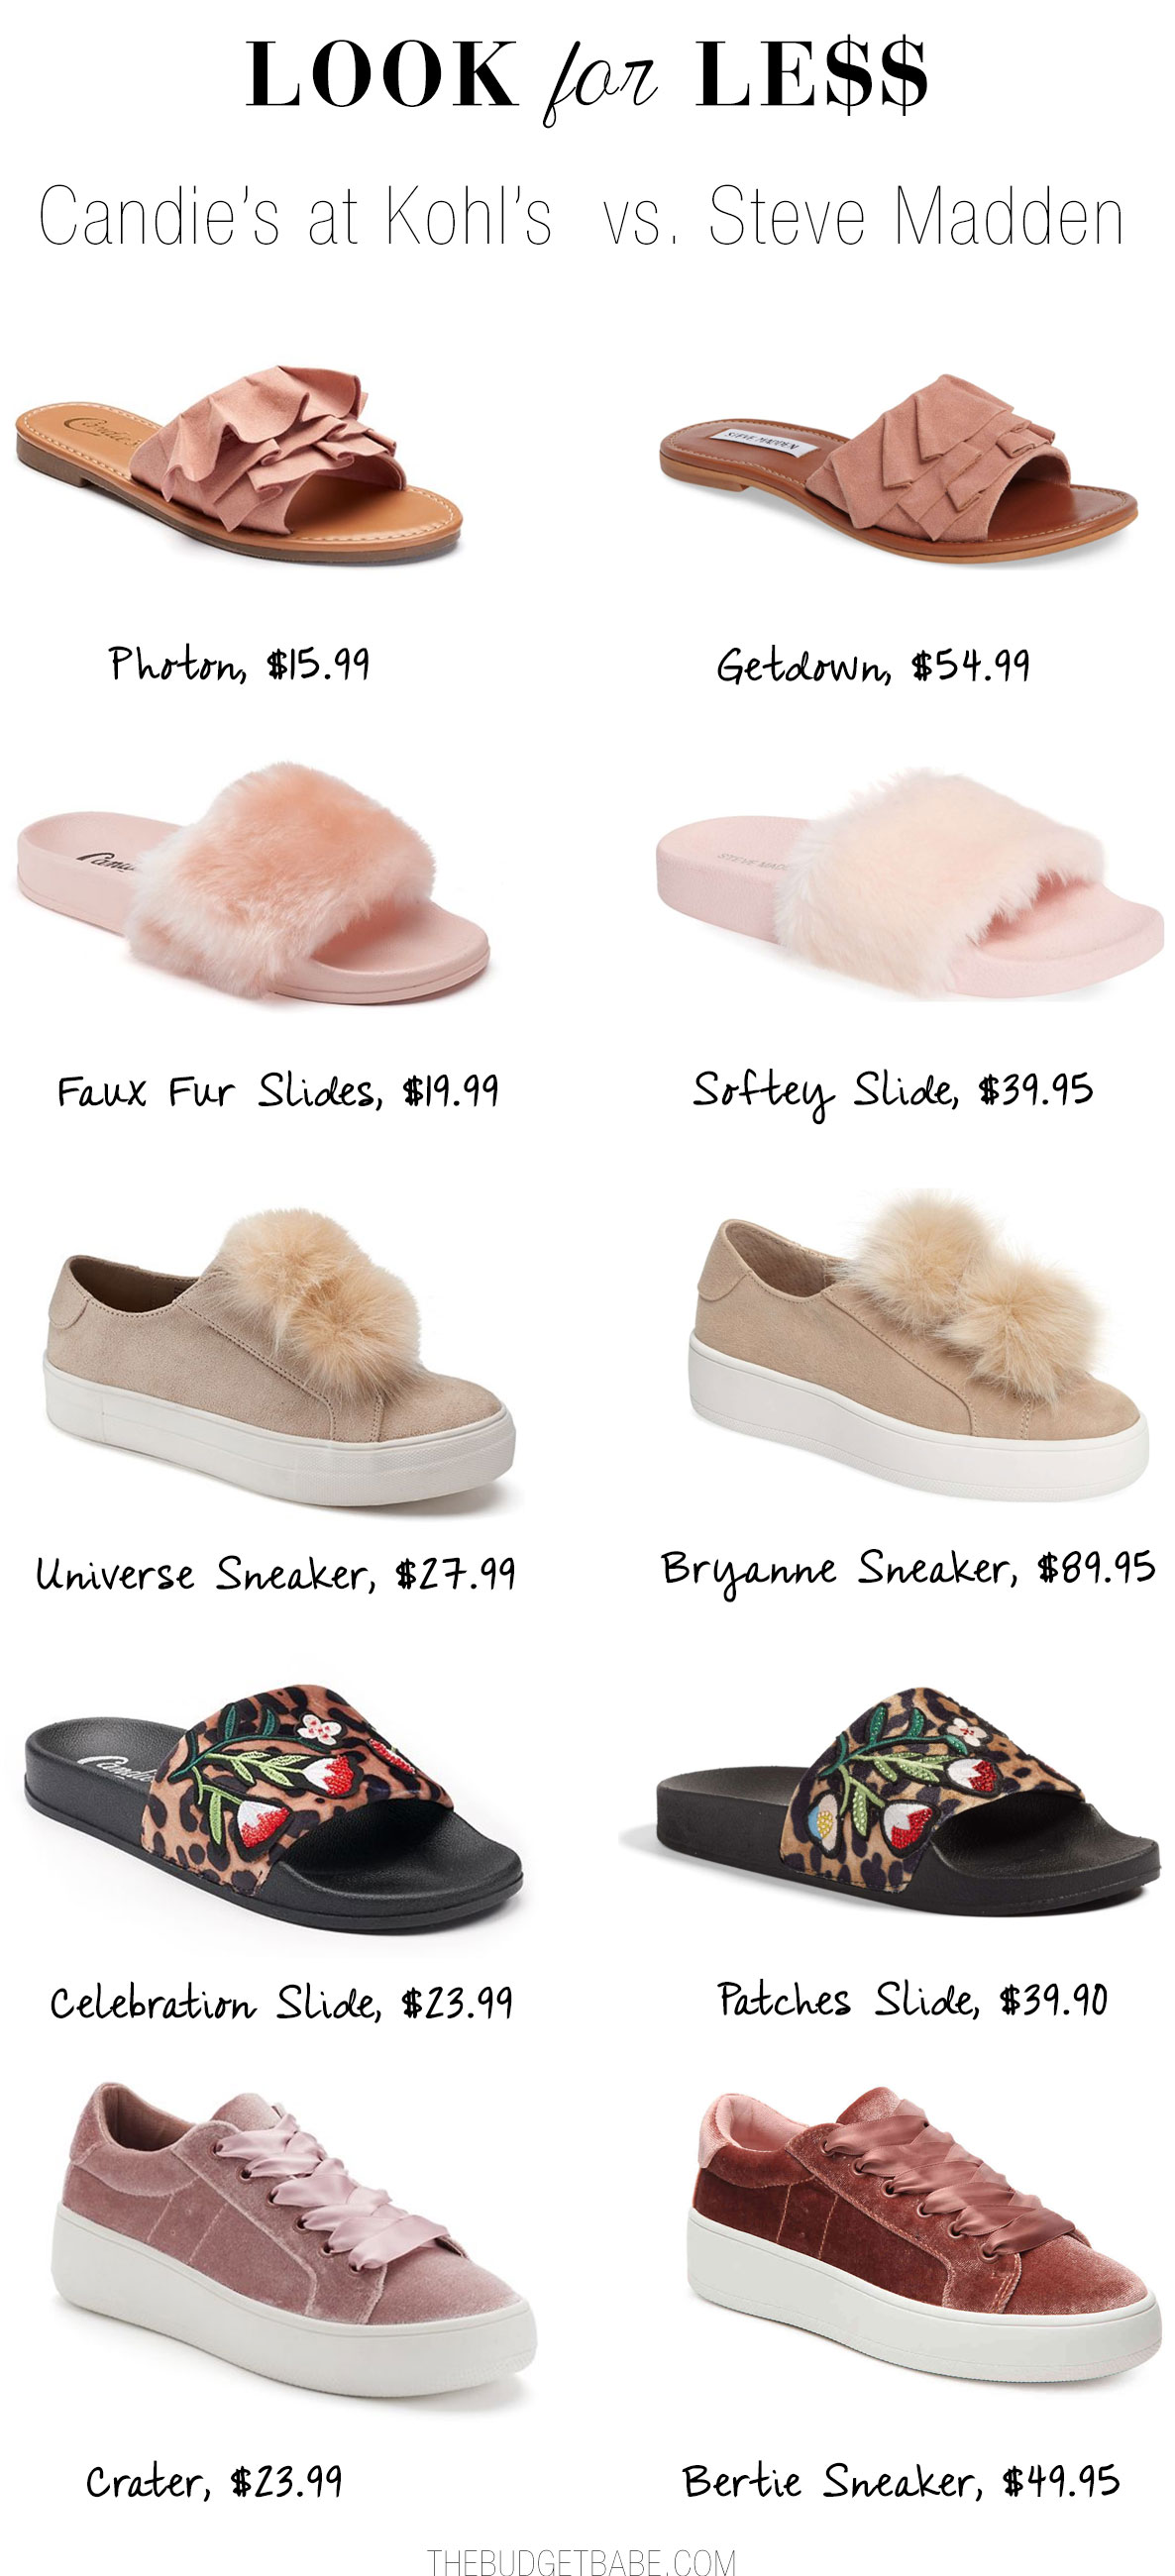 Get the Steve Madden Look for Less with 